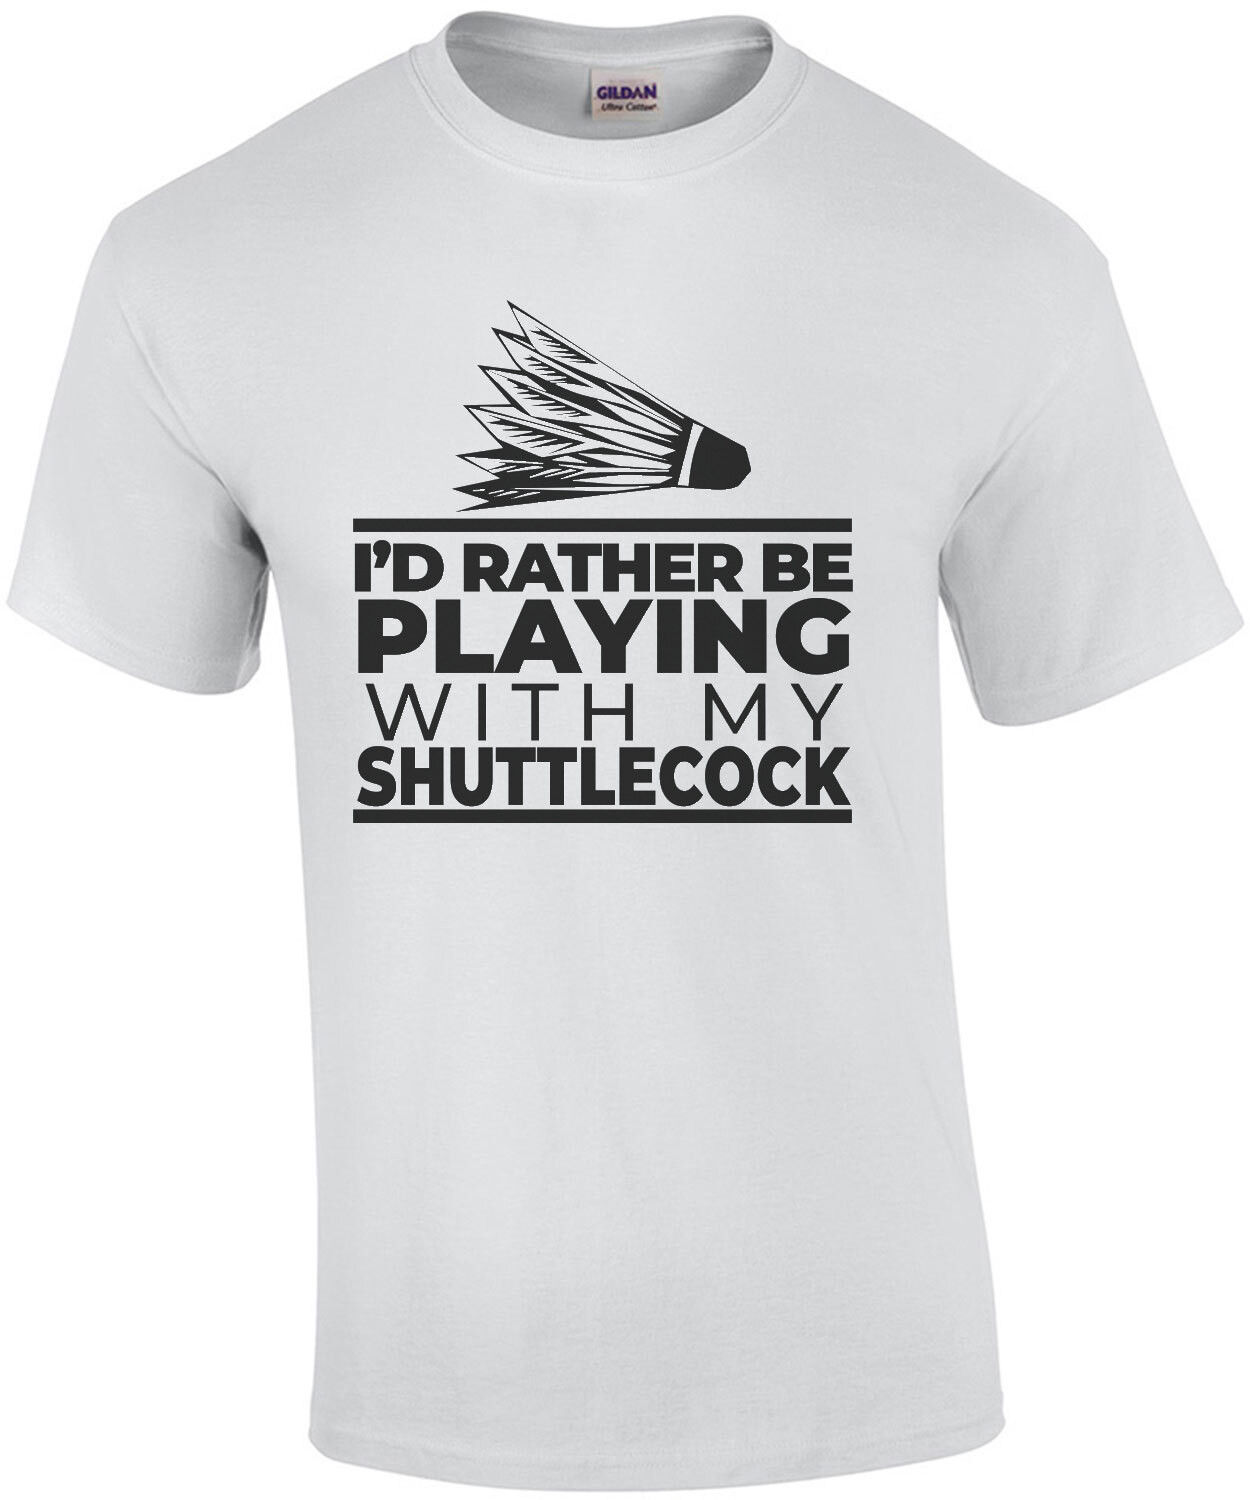 I'd rather be playing with my shuttlecock - funny badminton t-shirt